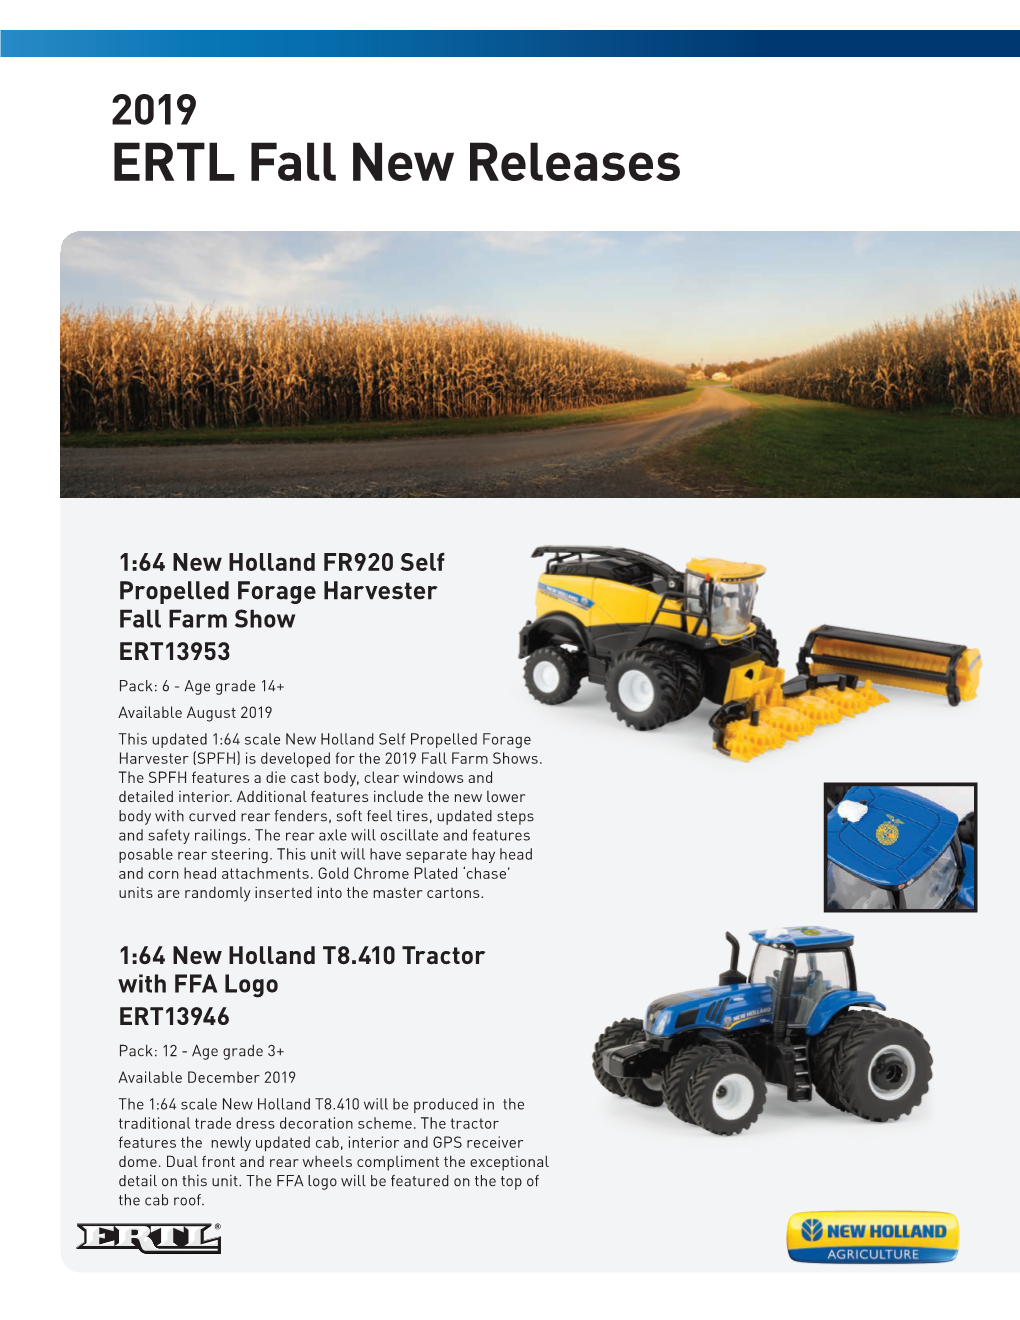 ERTL Fall New Releases